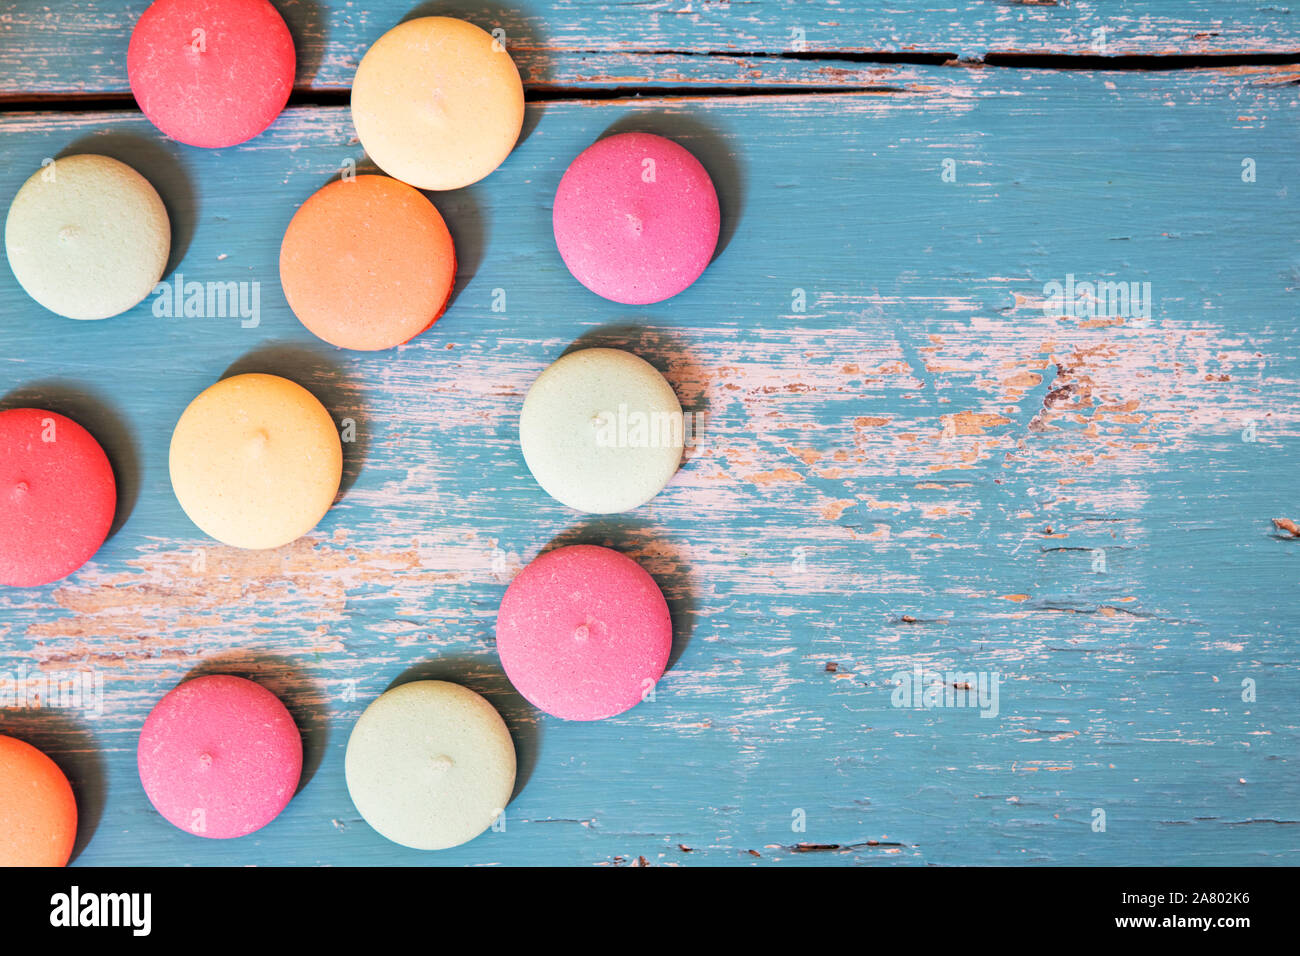 various of colorful biscuits or macarons on blue wooden background, copyspace Stock Photo